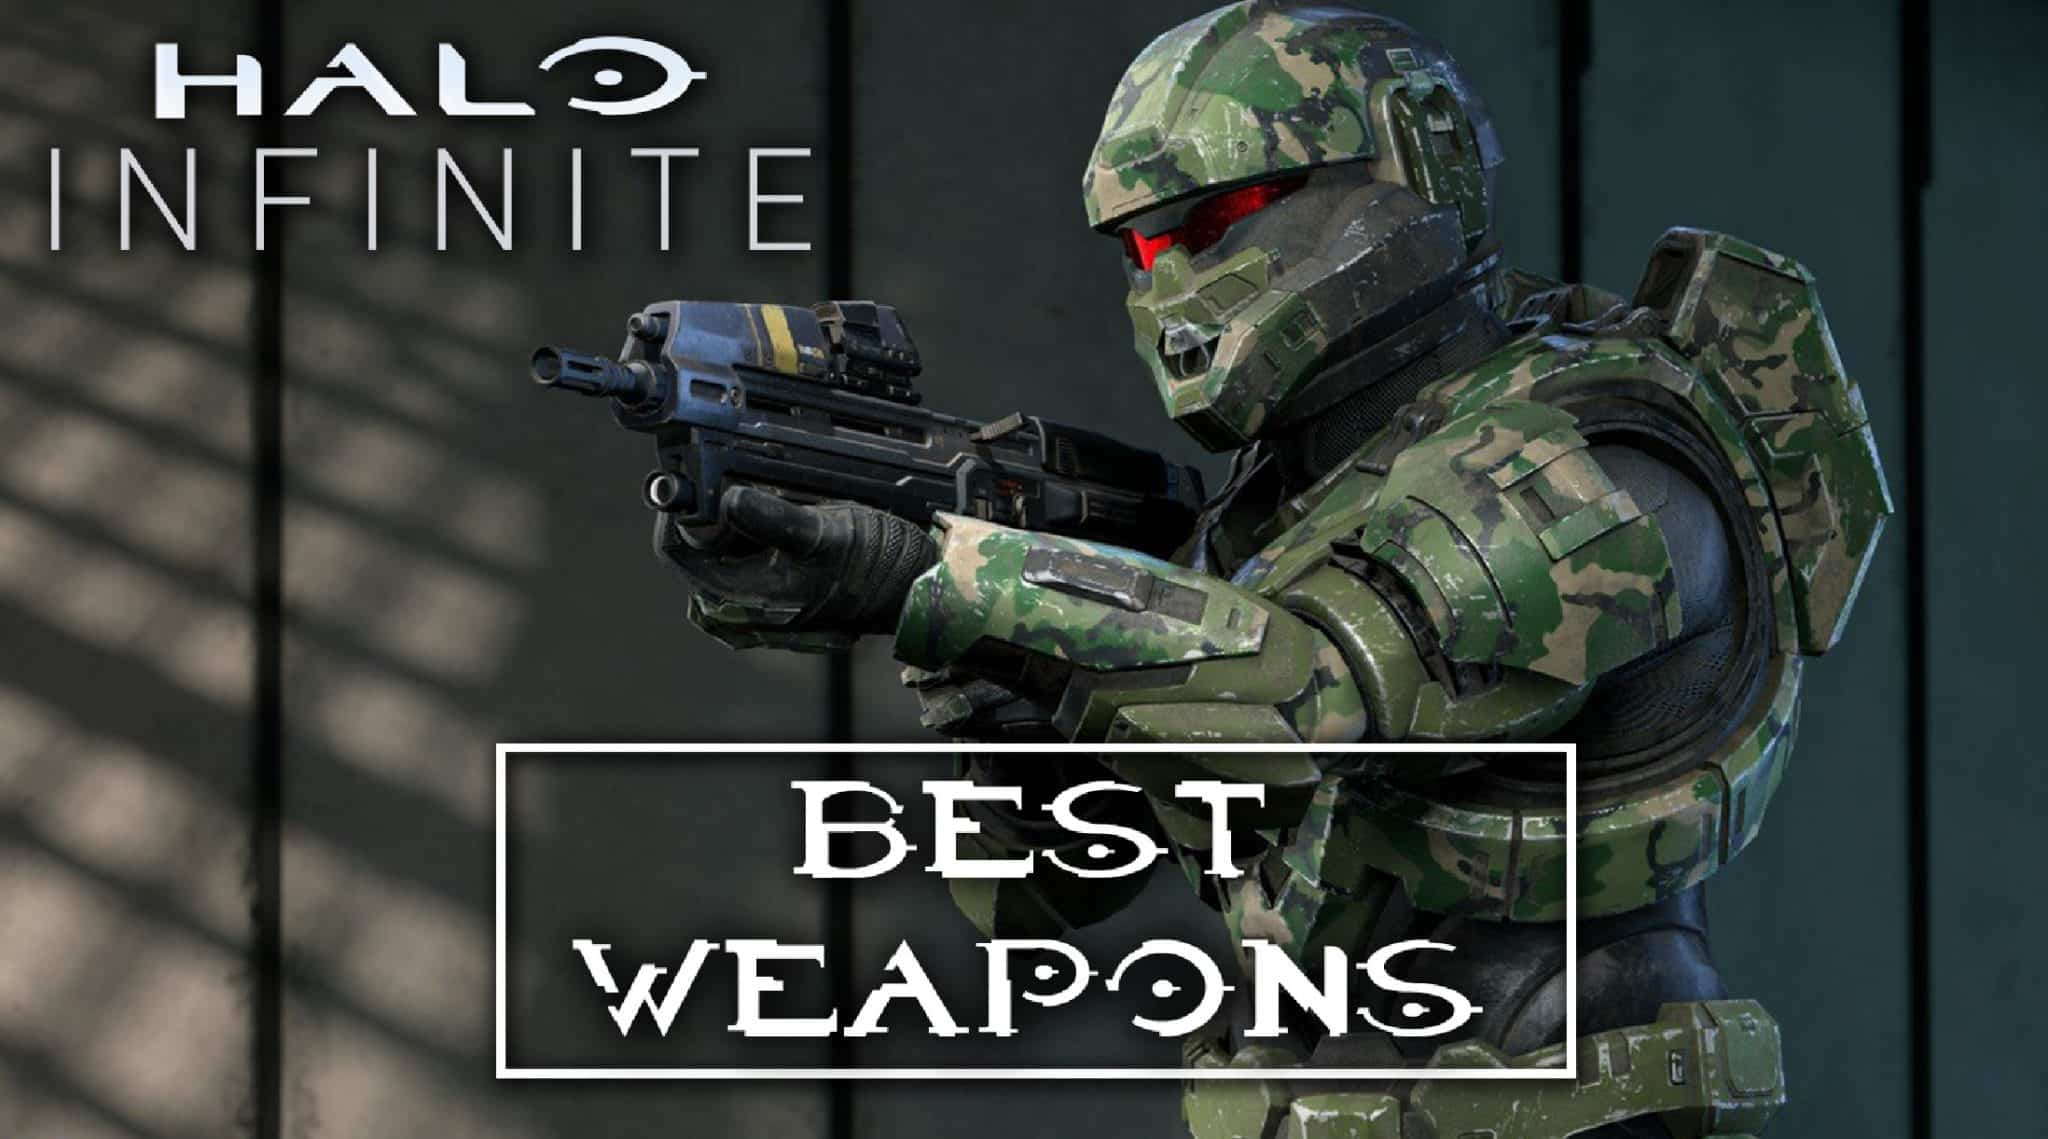 Halo Infinite best weapons graphic